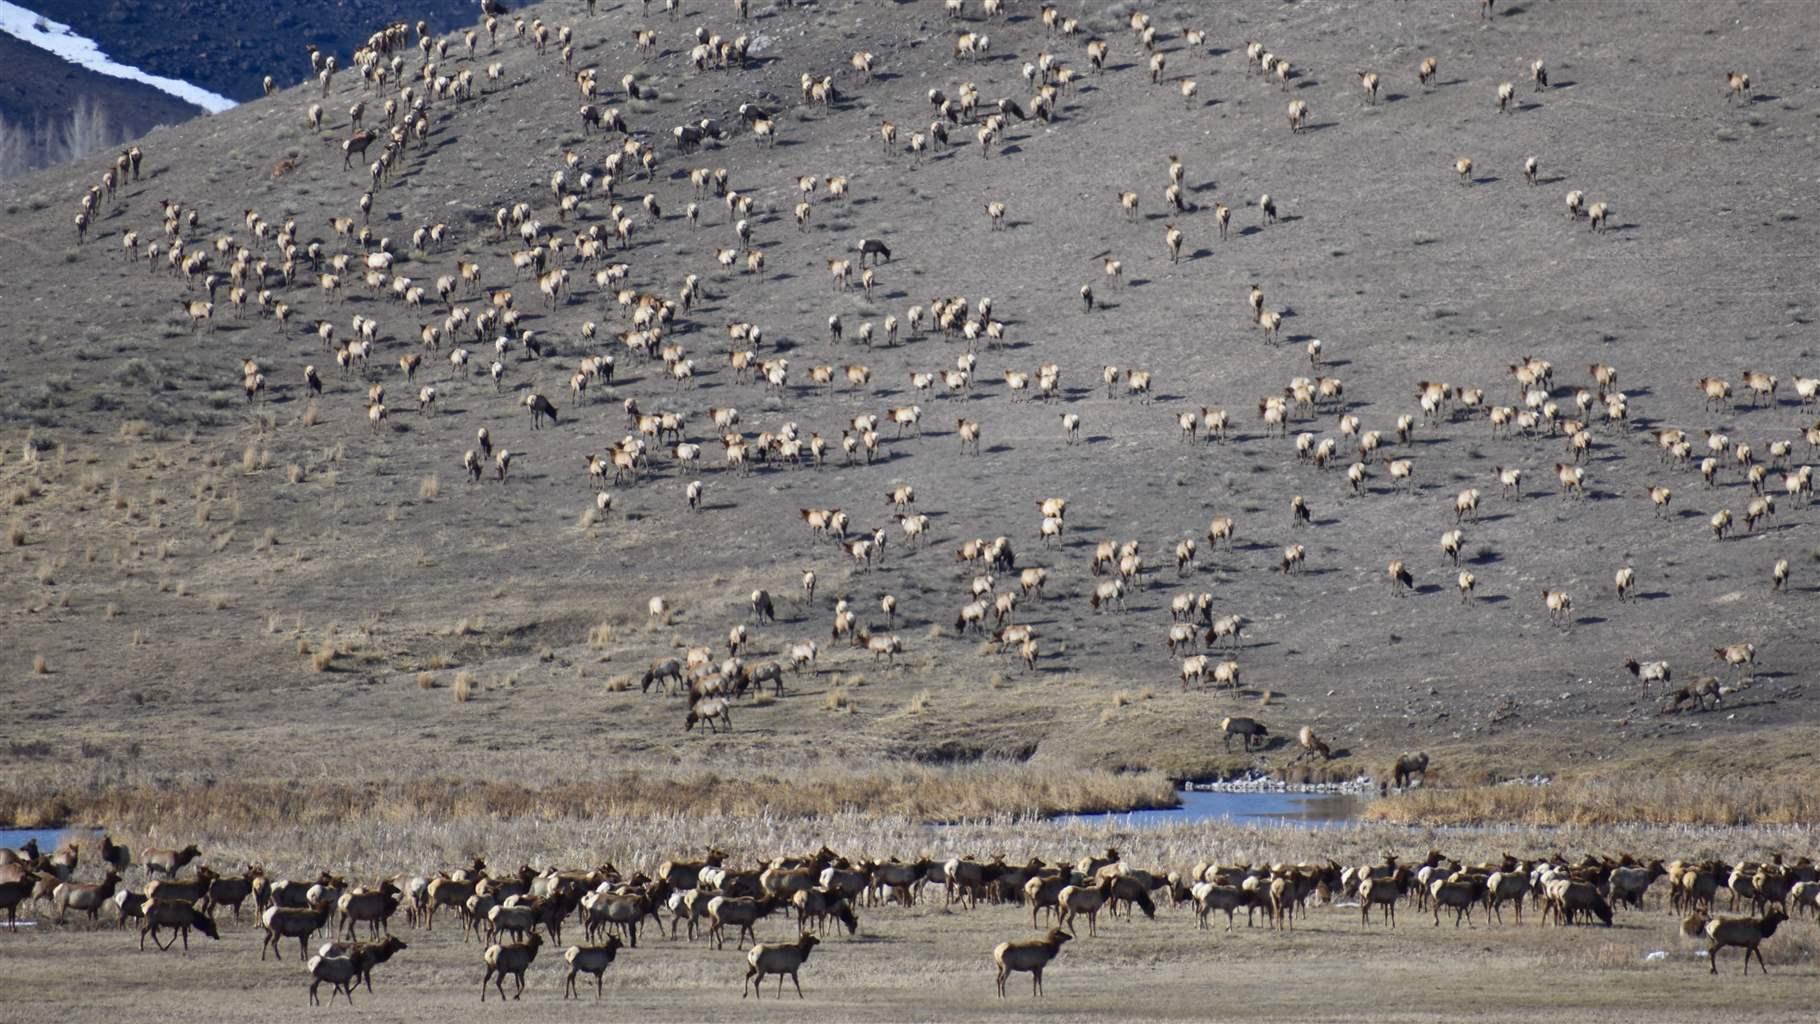 Thousands of elk winter in the National Elk Refuge in Wyoming. As the seasons change, many of these elk will make their way into the Bridger-Teton National Forest.